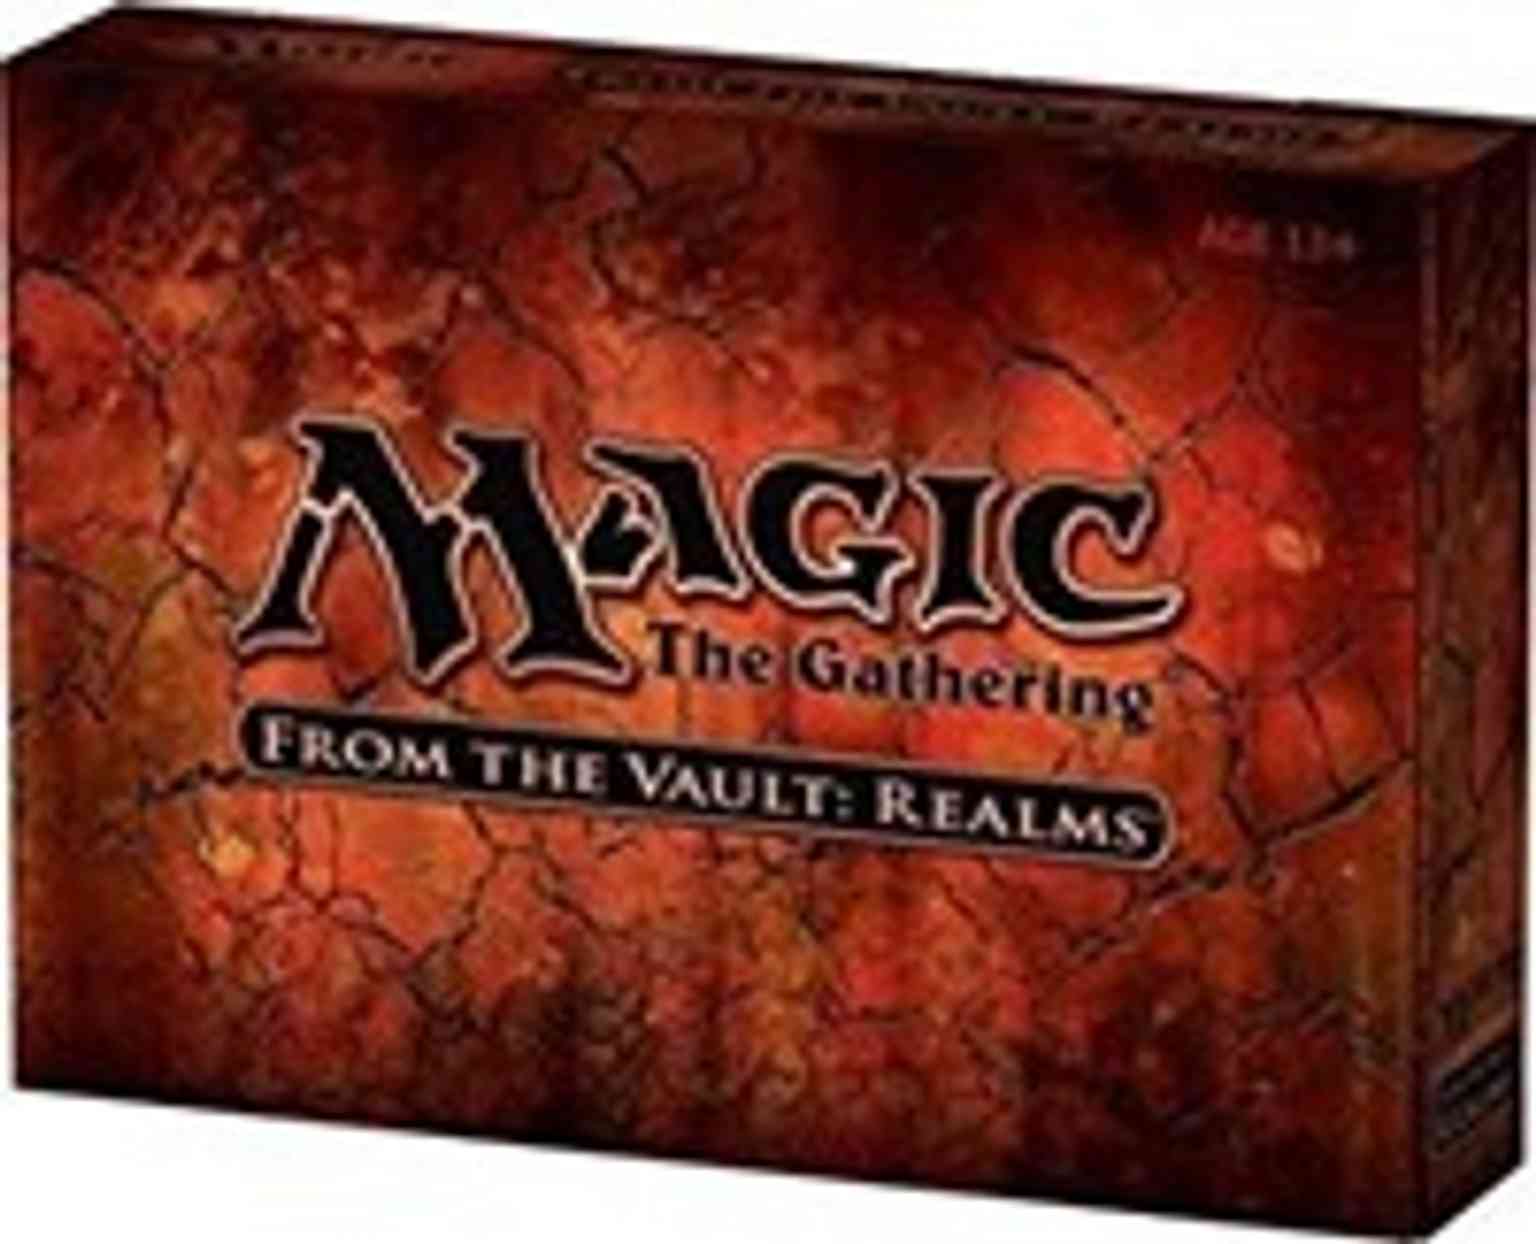 From the Vault: Realms - Box Set magic card front